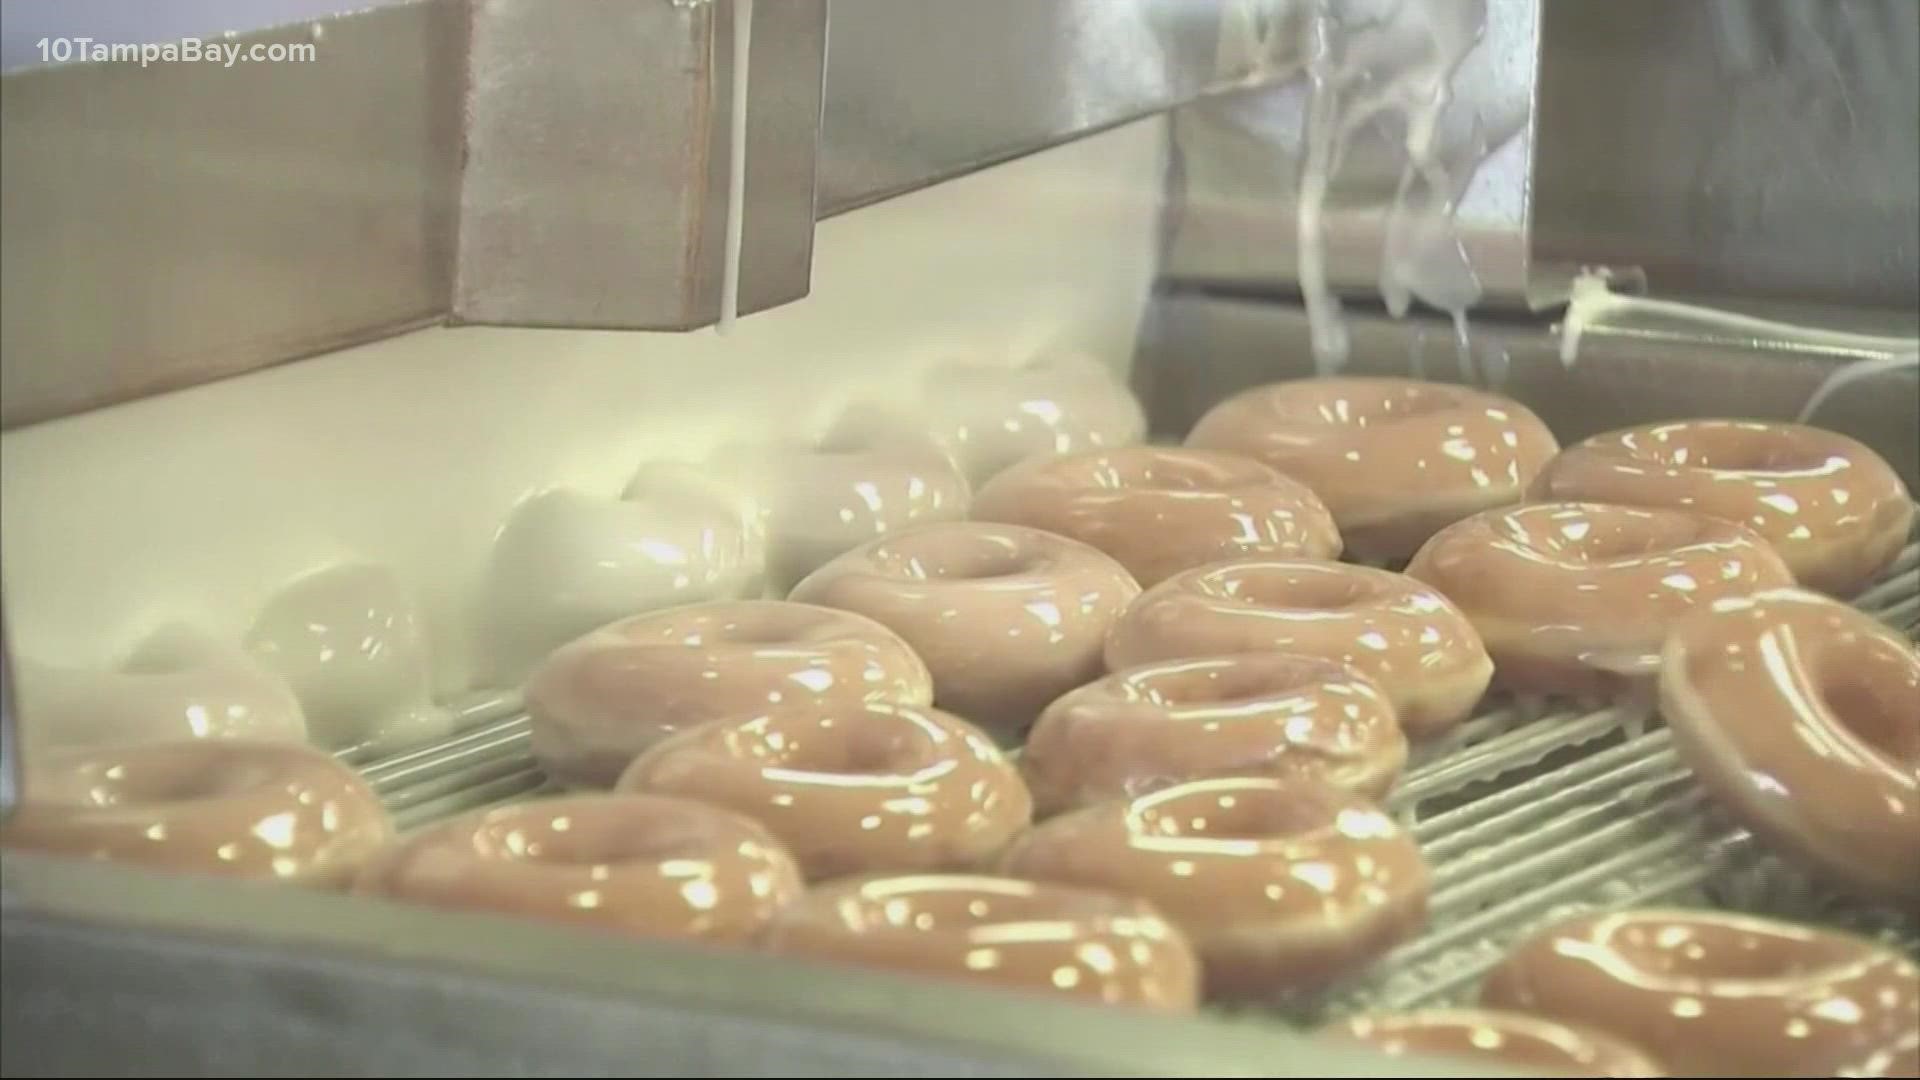 The popular donut franchise said they will offer this deal on Wednesdays only, starting April 13.